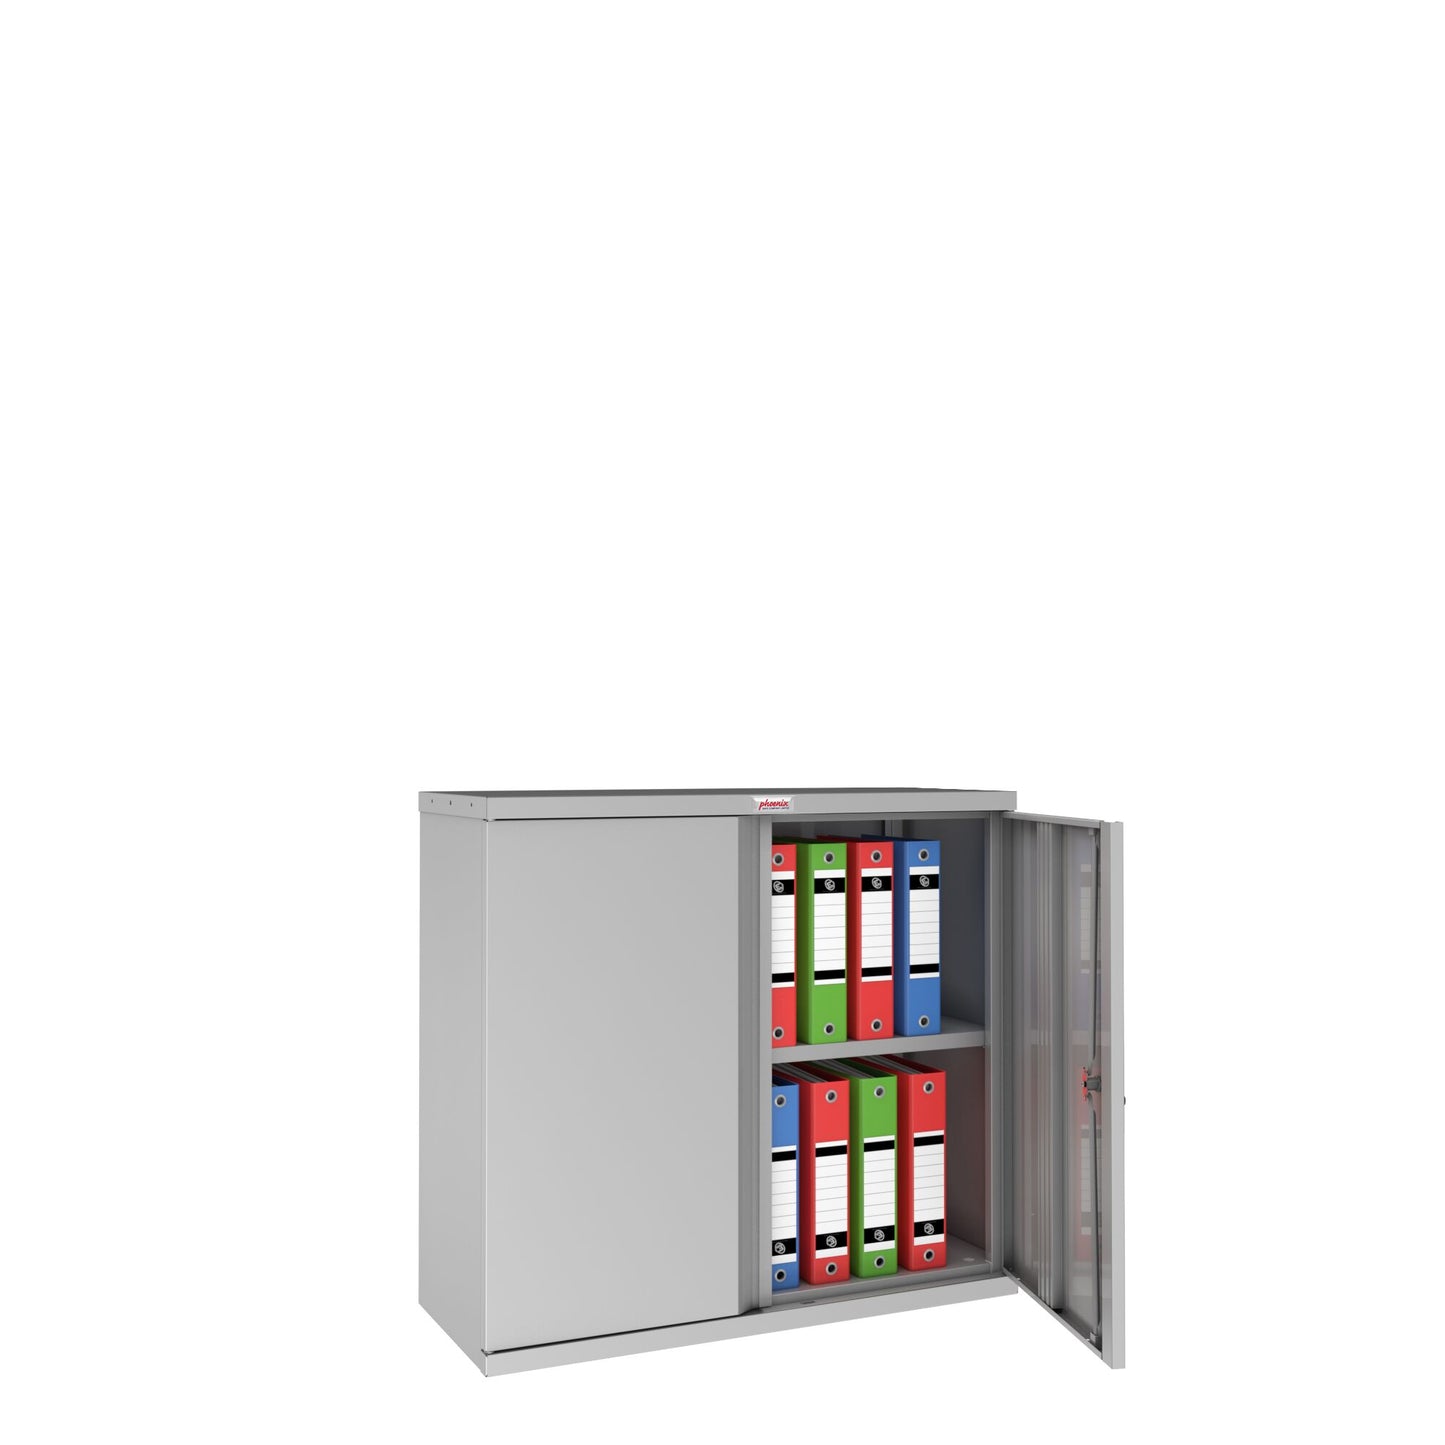 Low steel storage cupboard Light Duty - Price includes Delivery & Build & Position on site